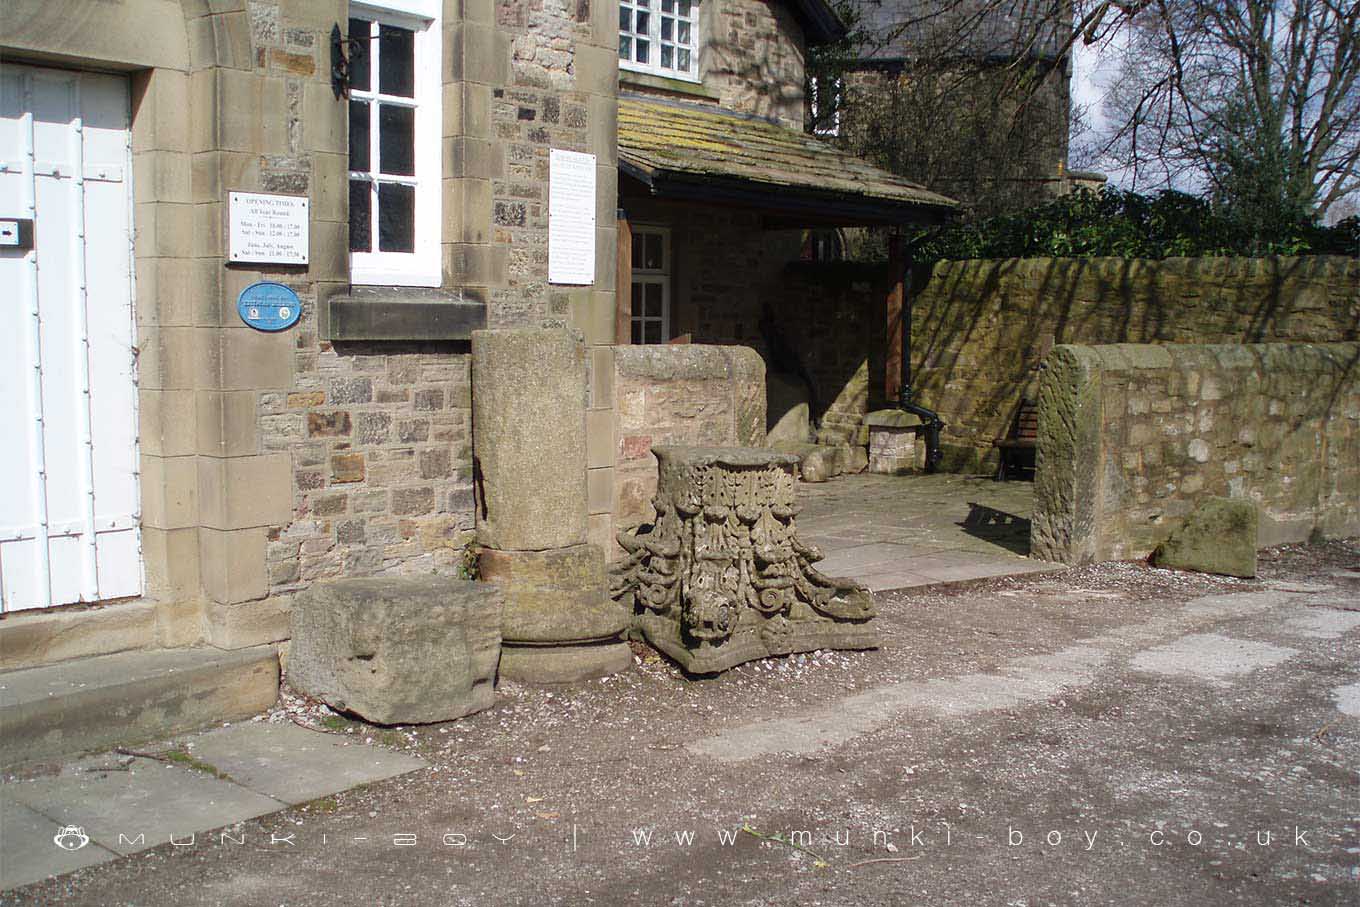 Museums in Lancashire